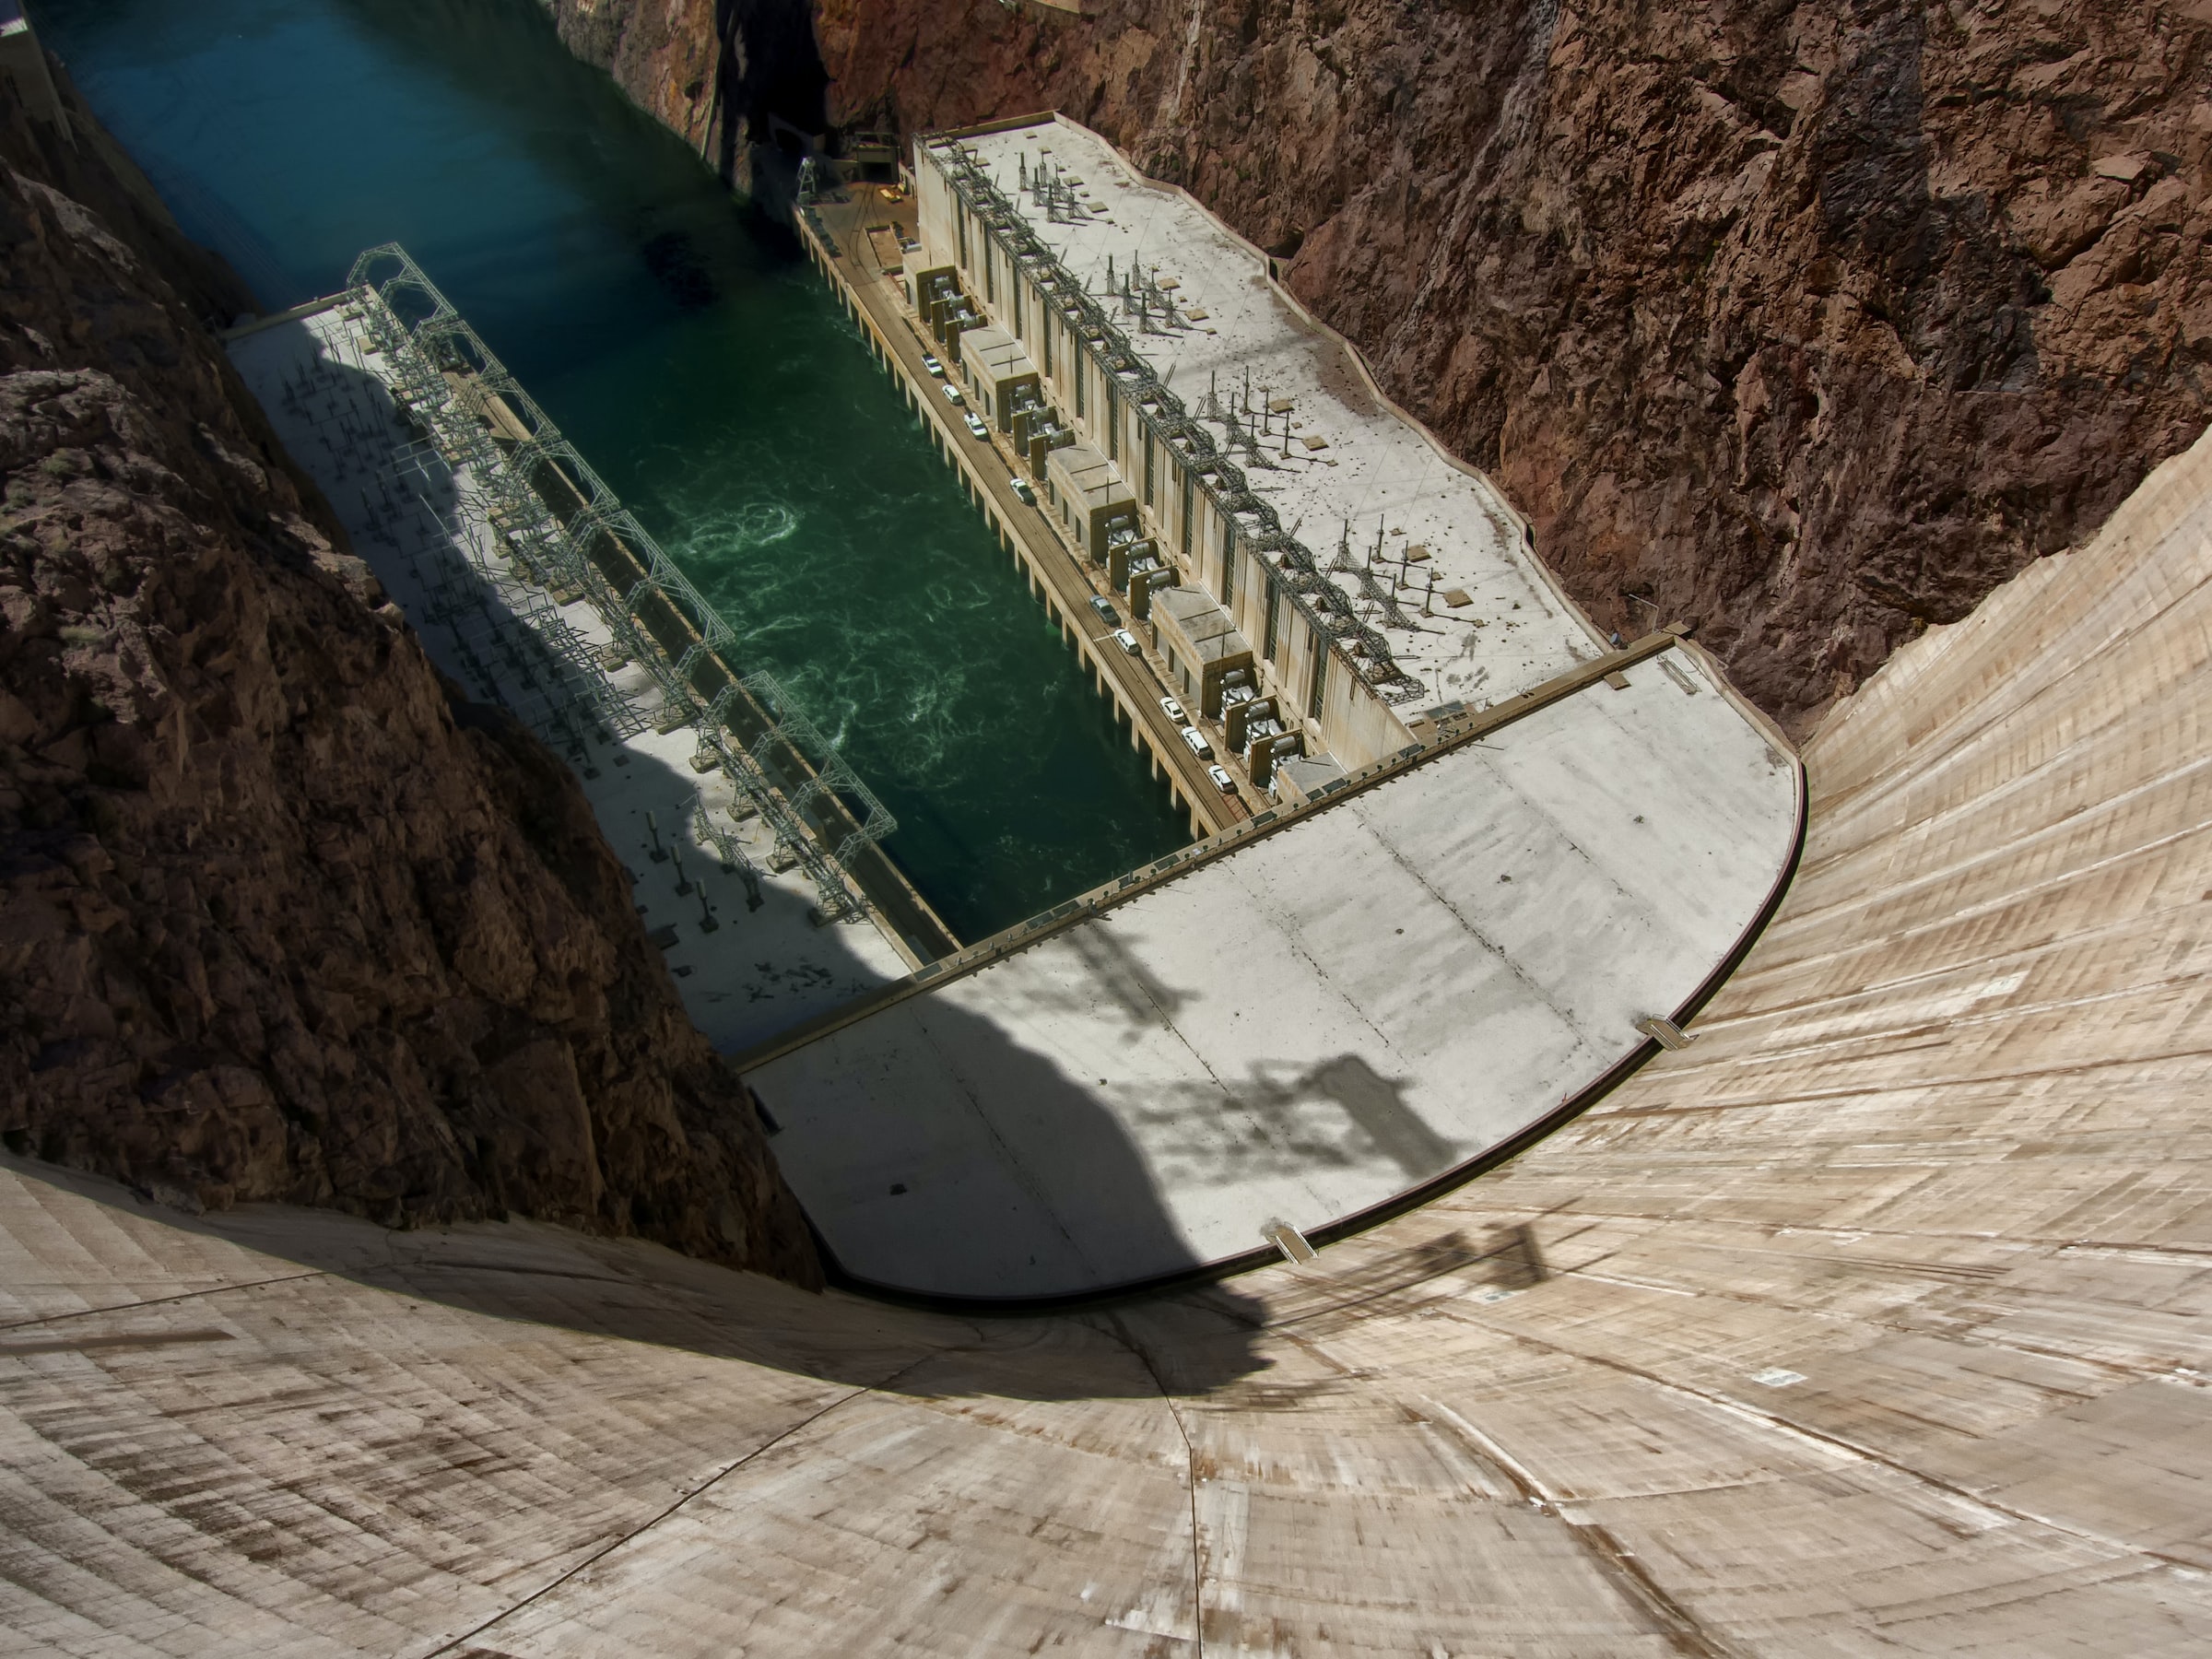 A view down the side of a large hydroelectric dam